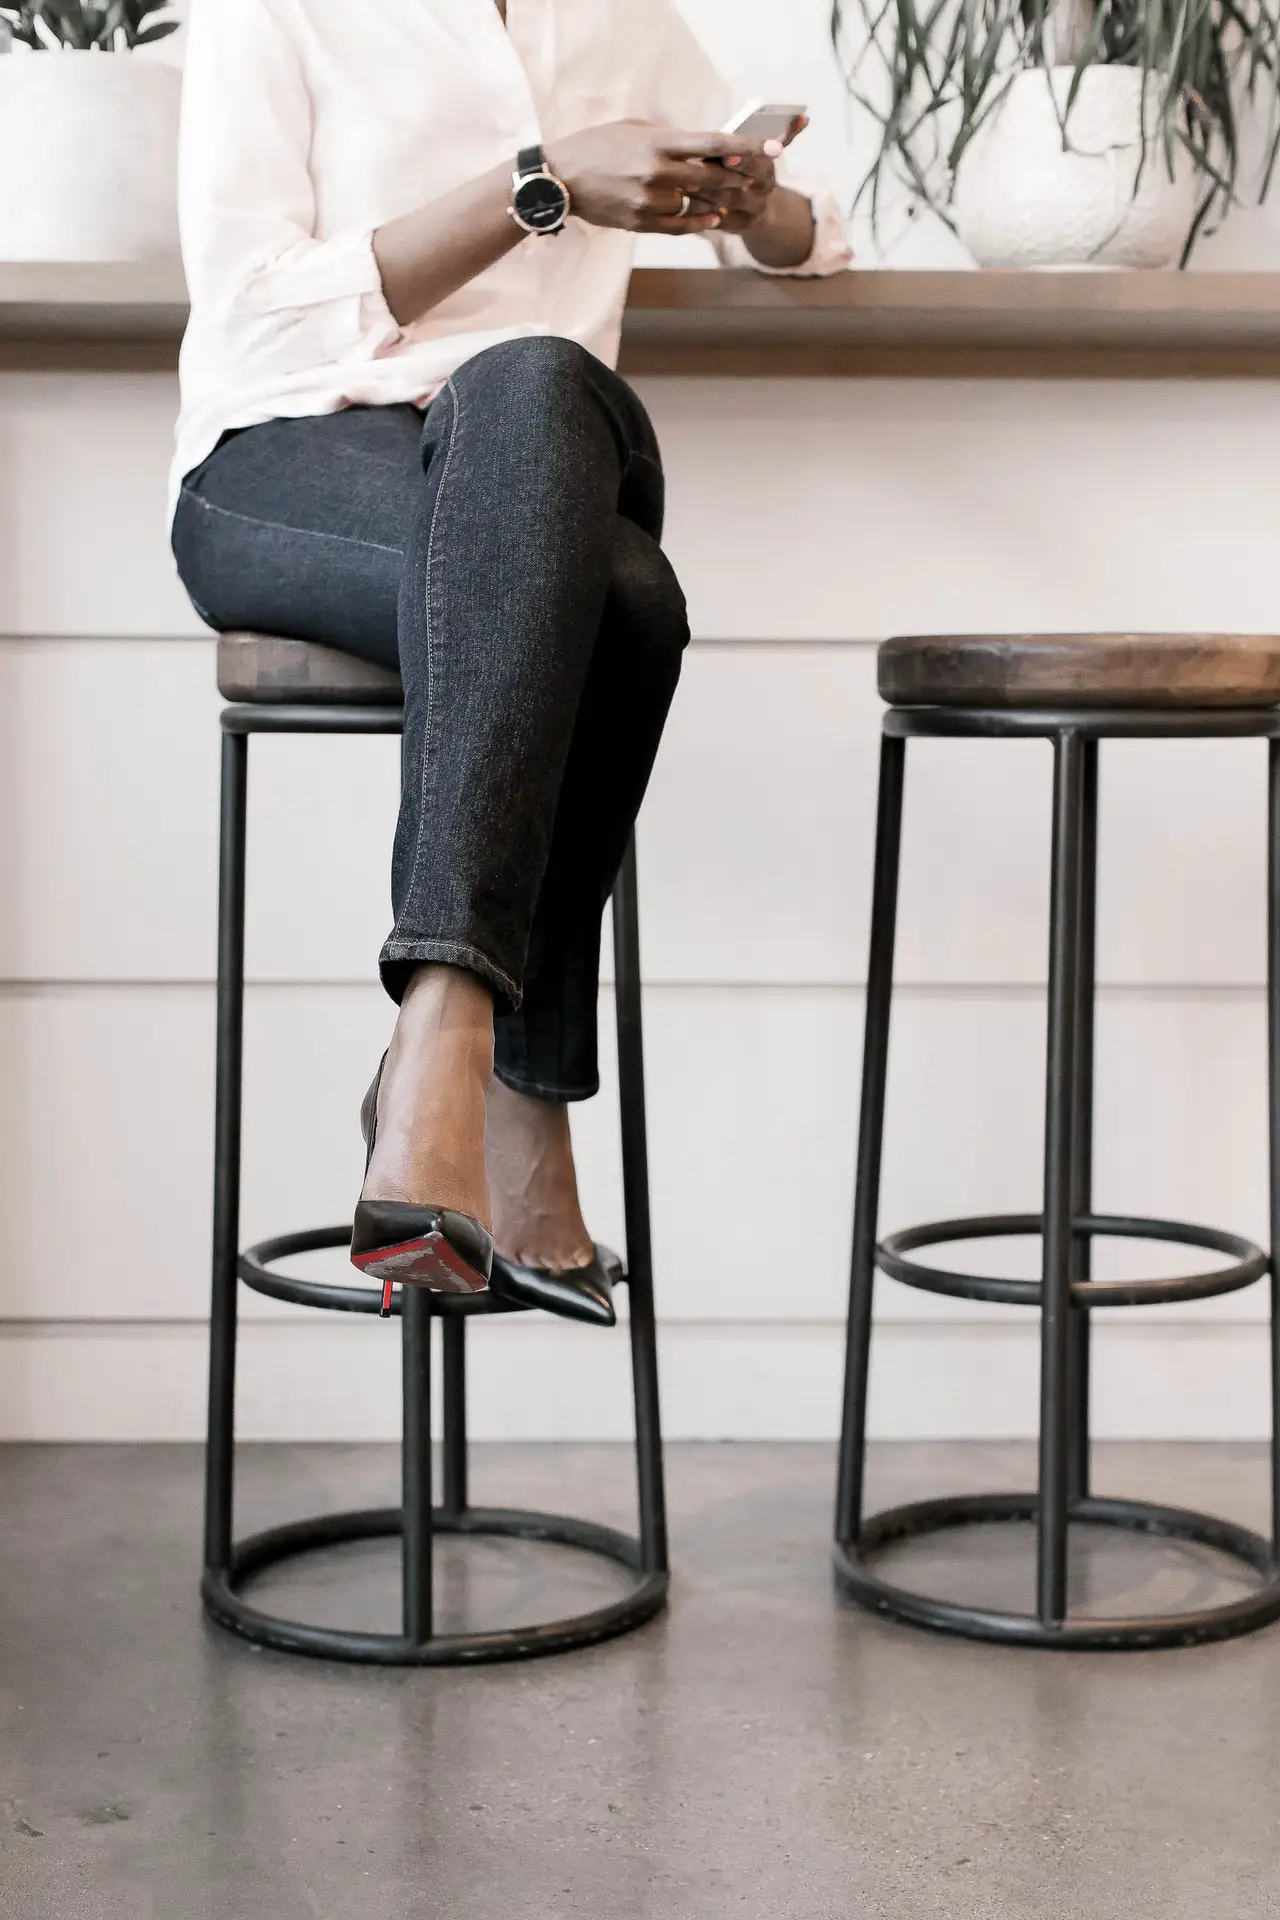 Woman sitting on bar stool with legs crossed with her cell phone in hands